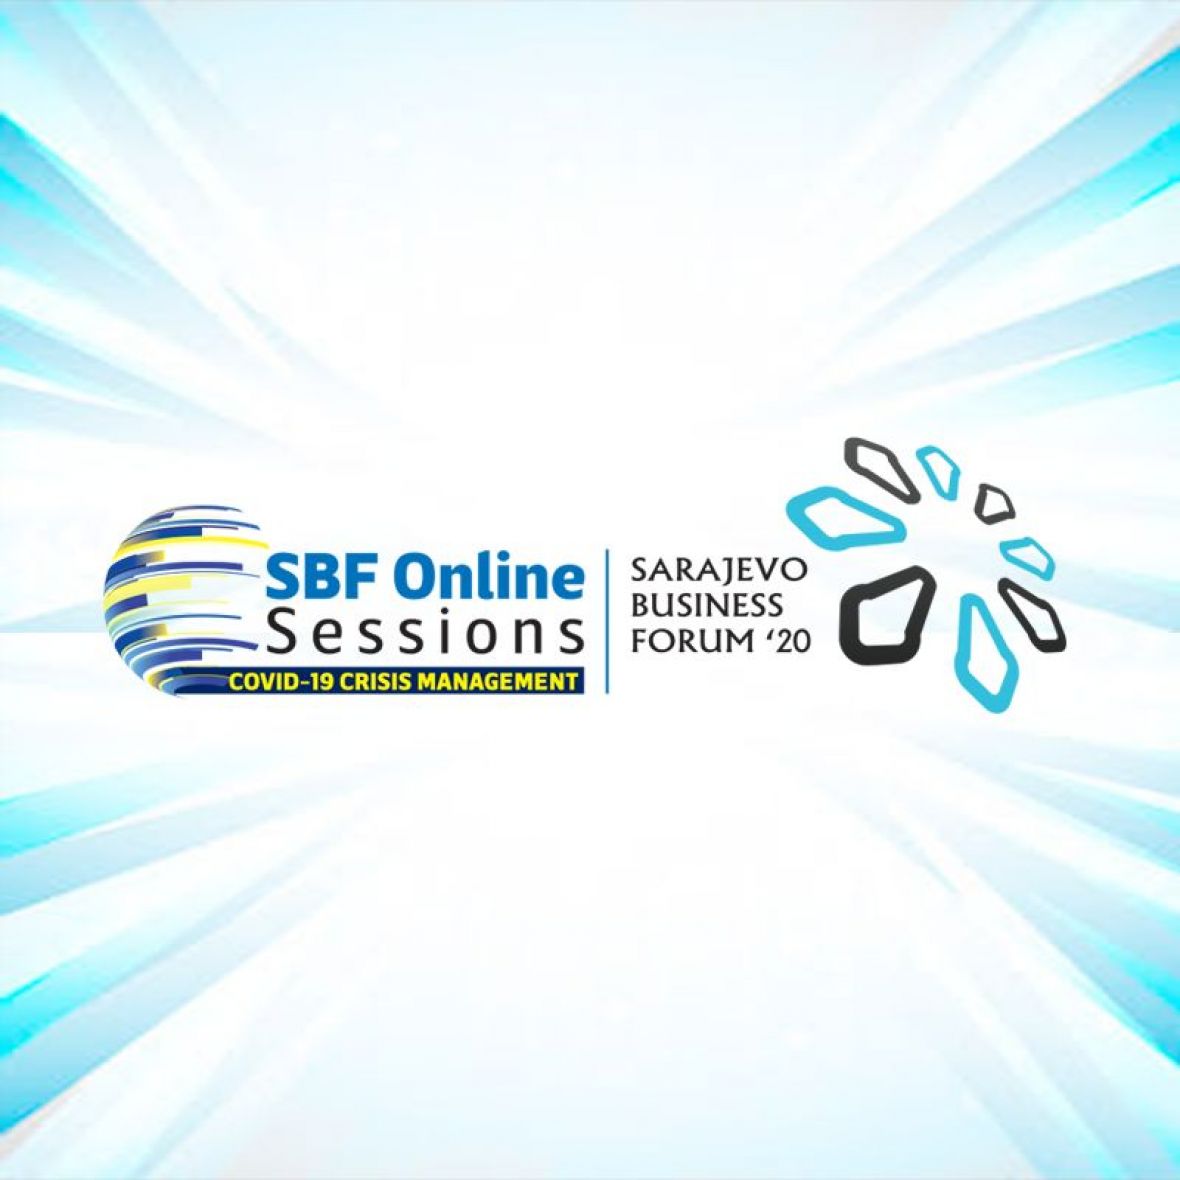 SBF Online sessions - undefined